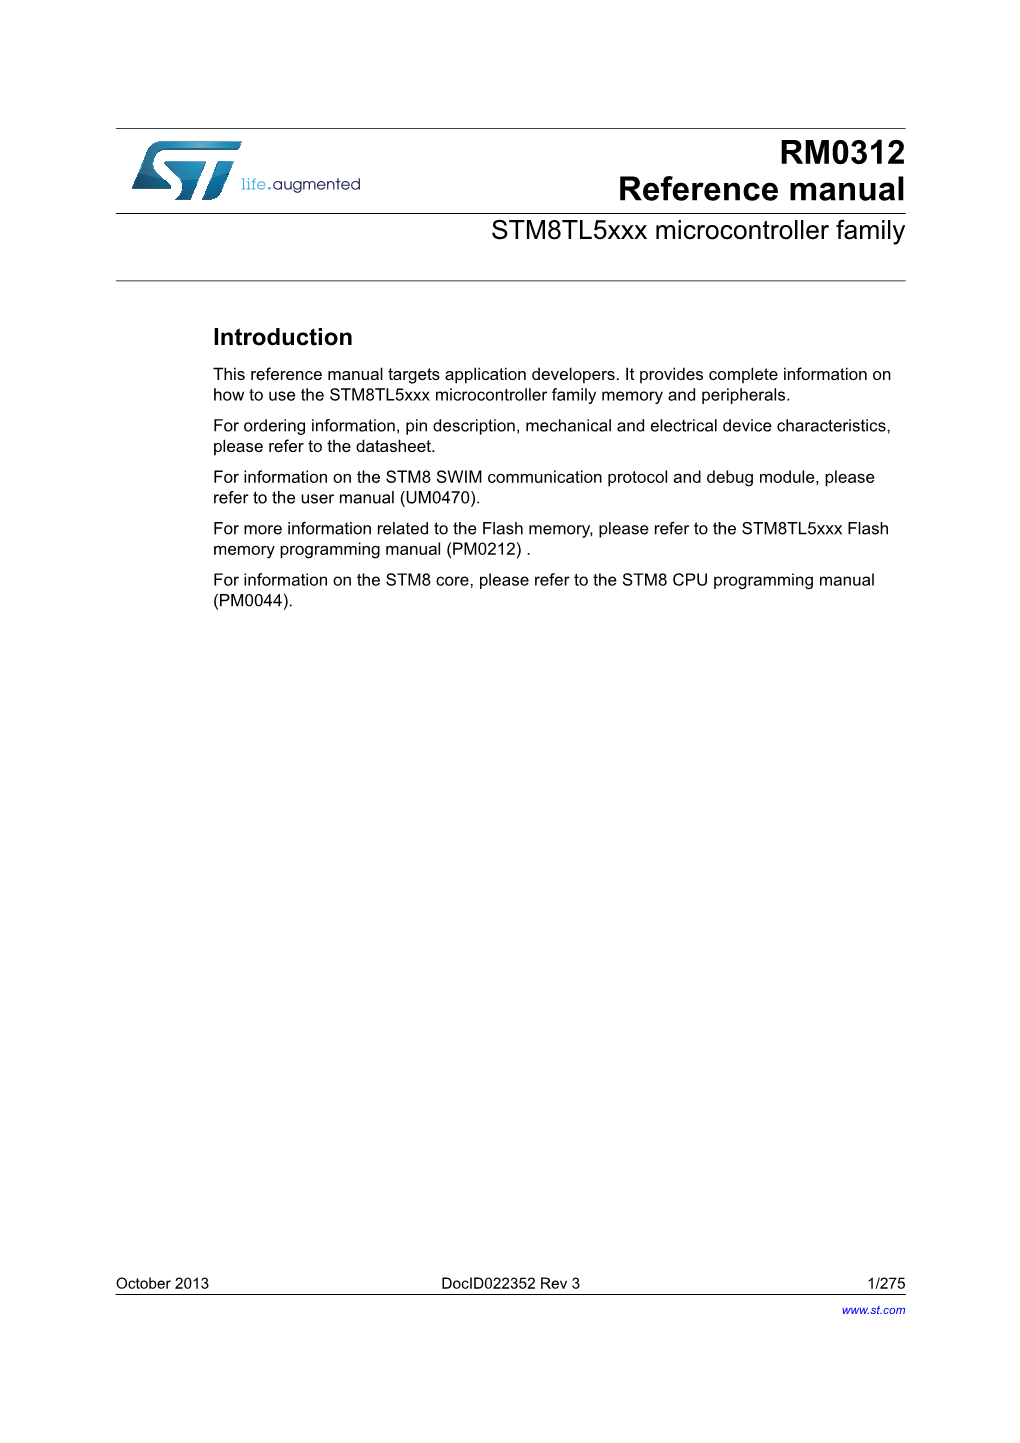 RM0312 Reference Manual Stm8tl5xxx Microcontroller Family